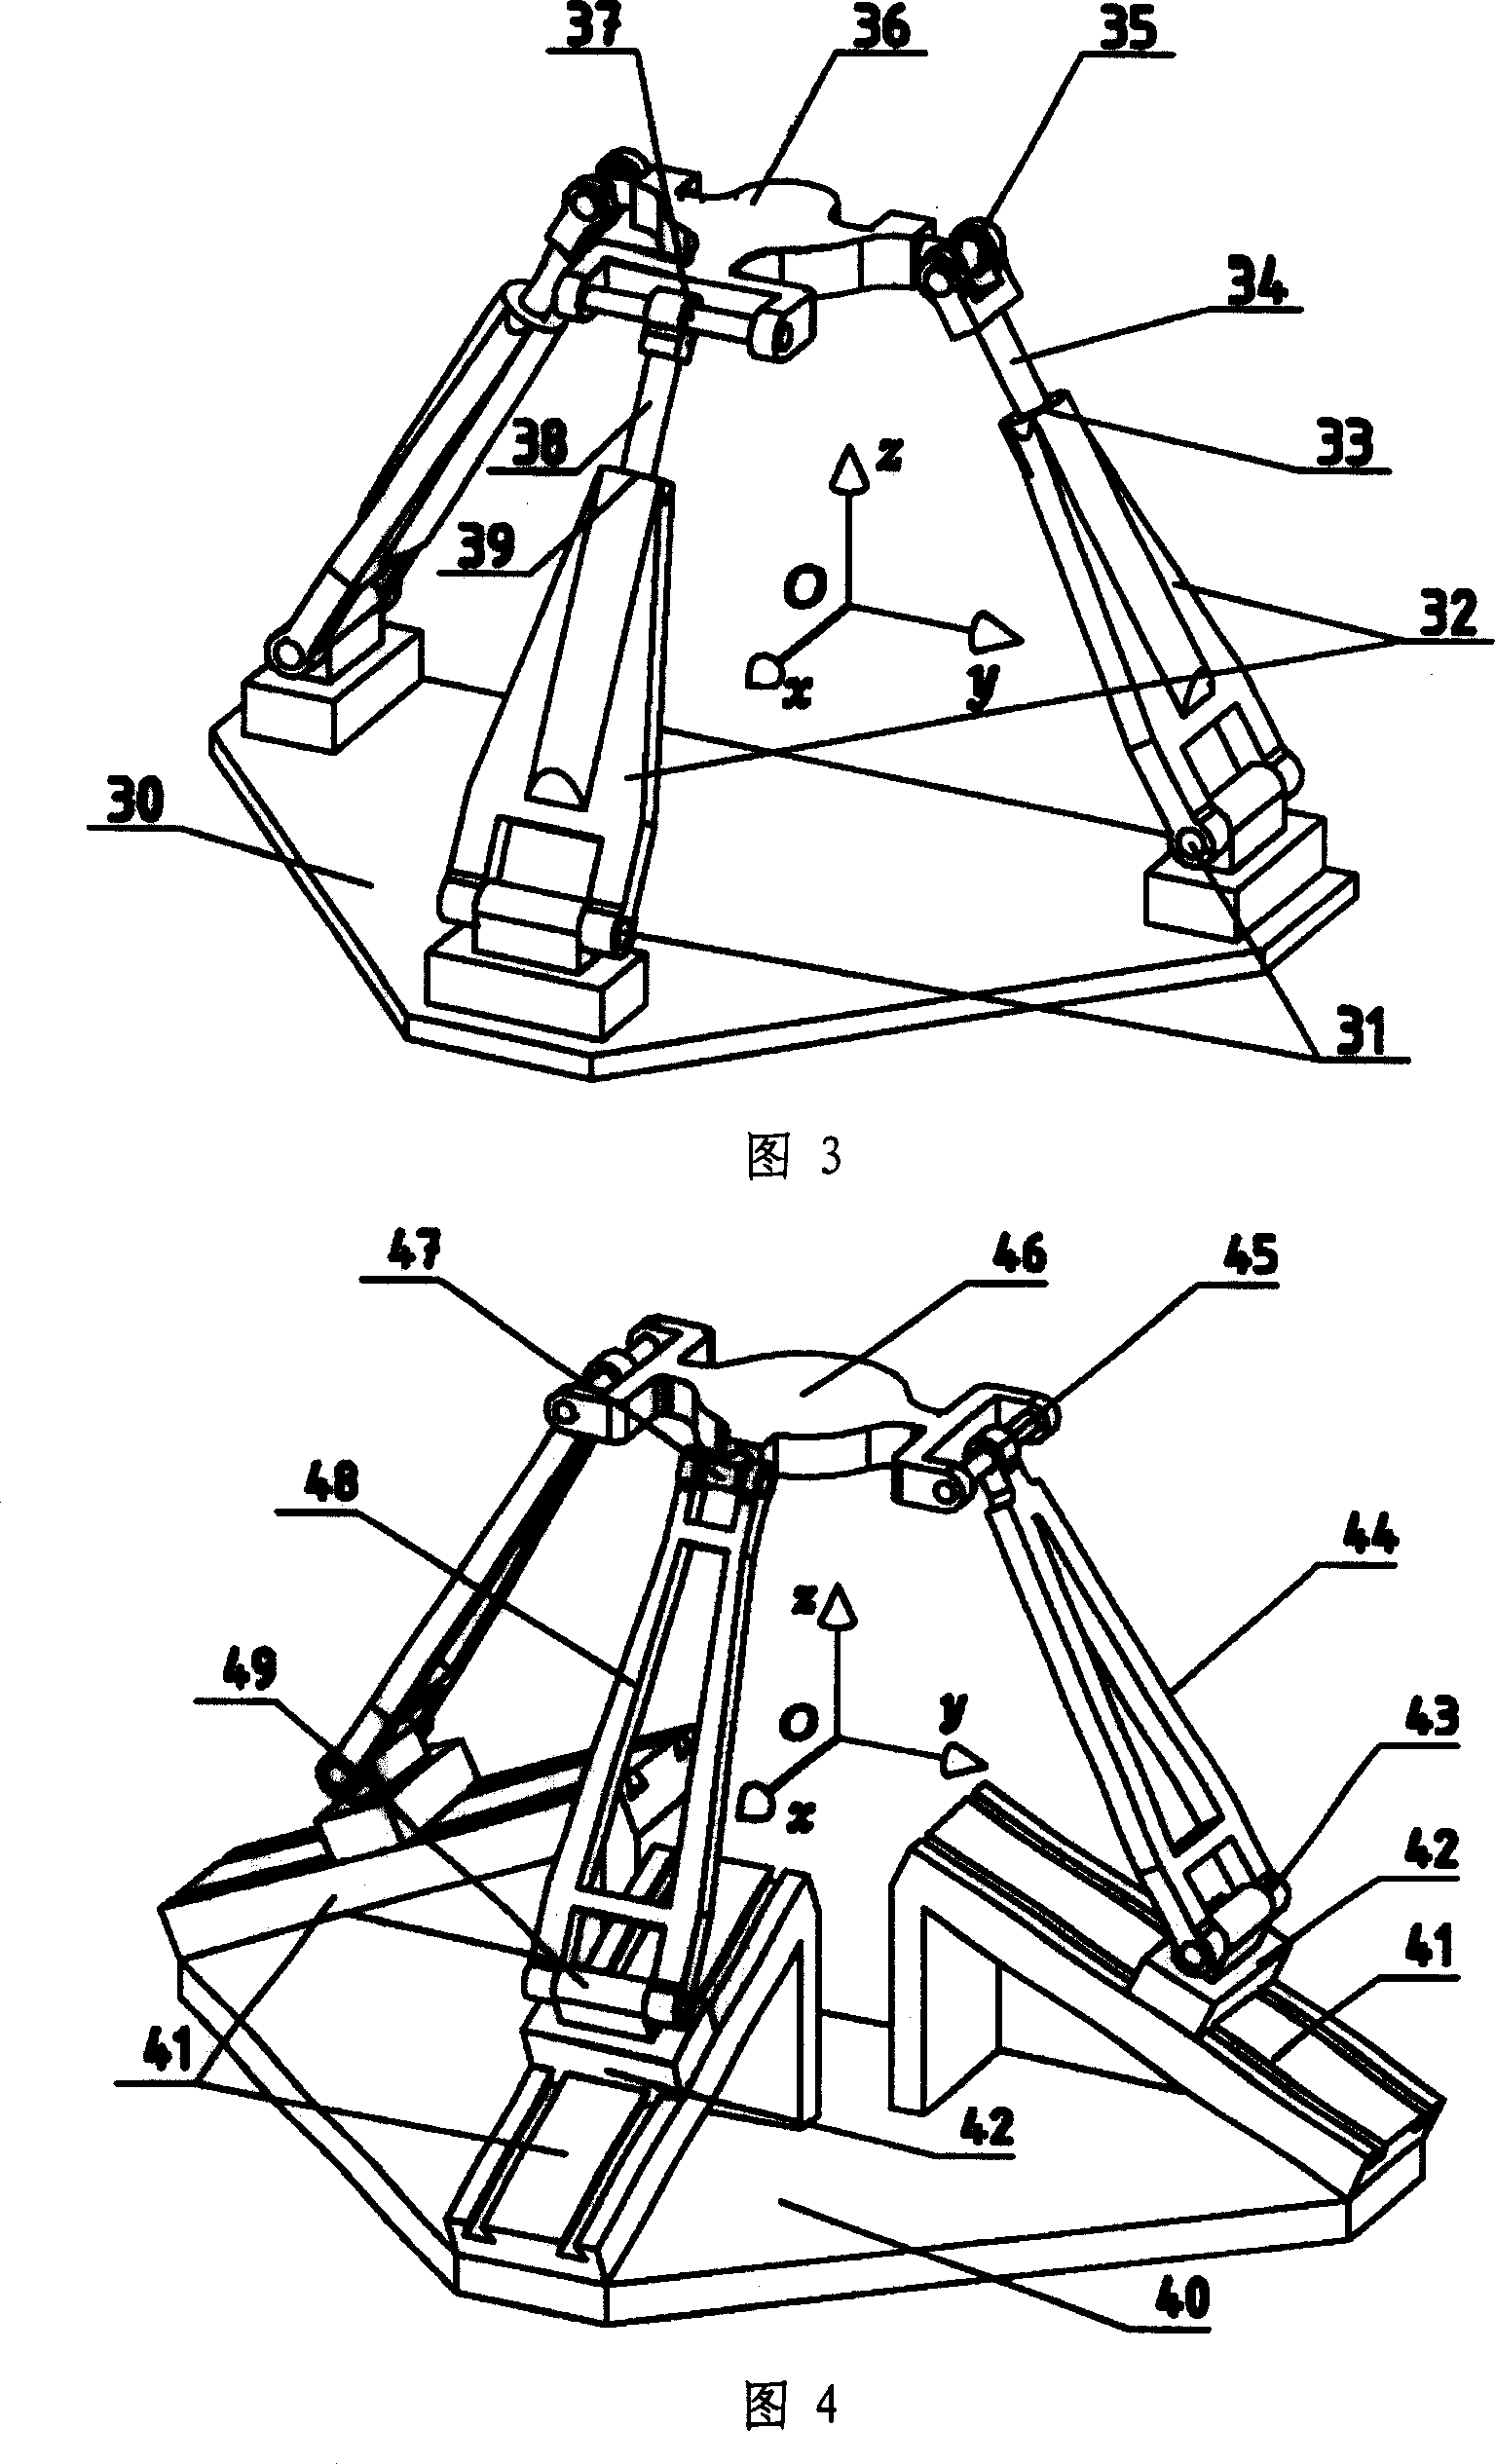 Moving-decoupling space three-freedom connection-in-parallel mechanism